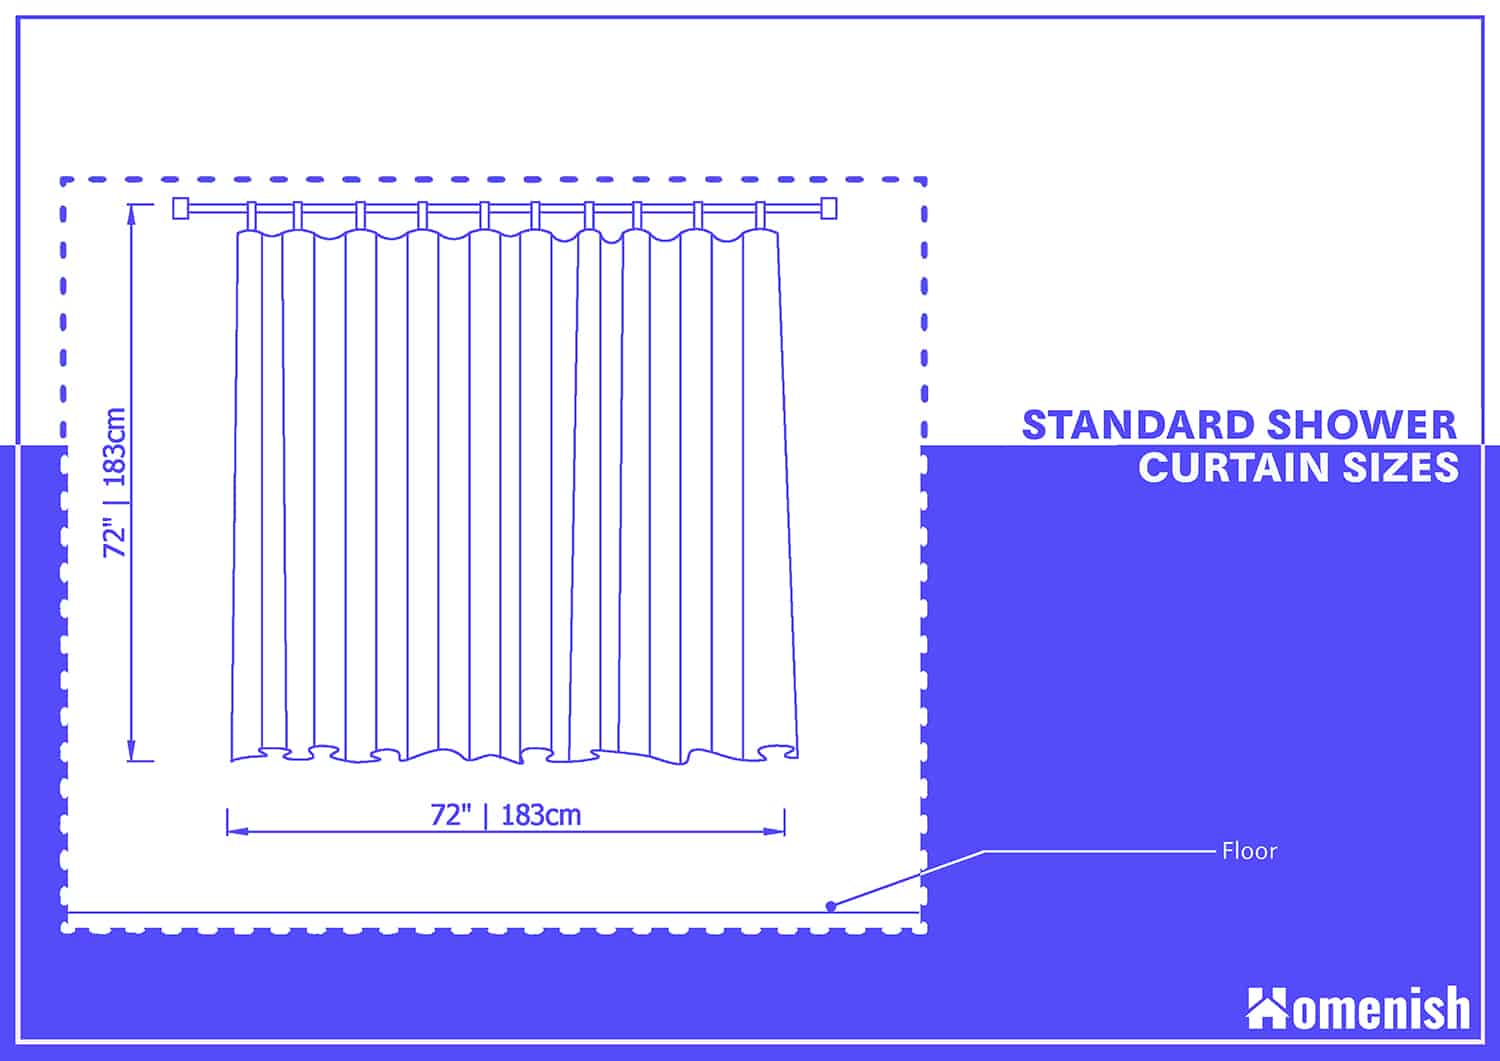 Standard Shower Curtain Size, What Are The Sizes Of Shower Curtains